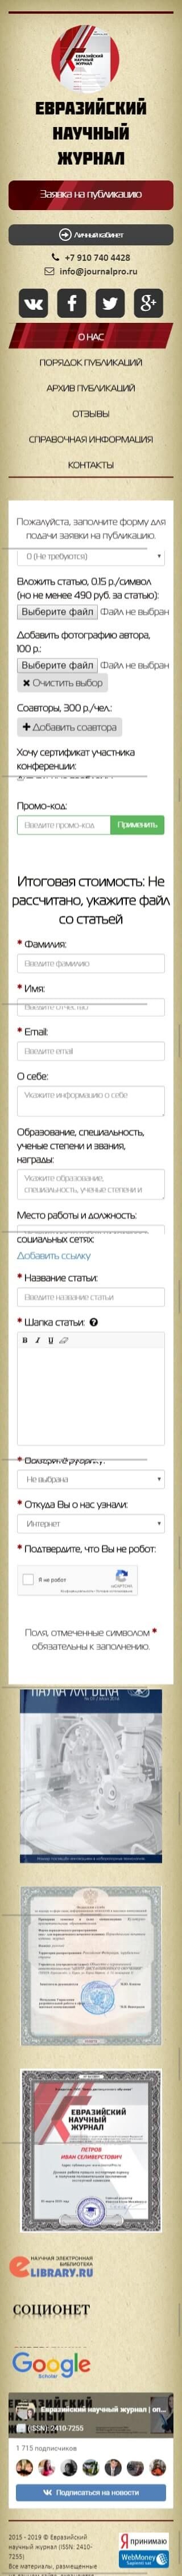 image of the mobile version of the site «Journalpro»